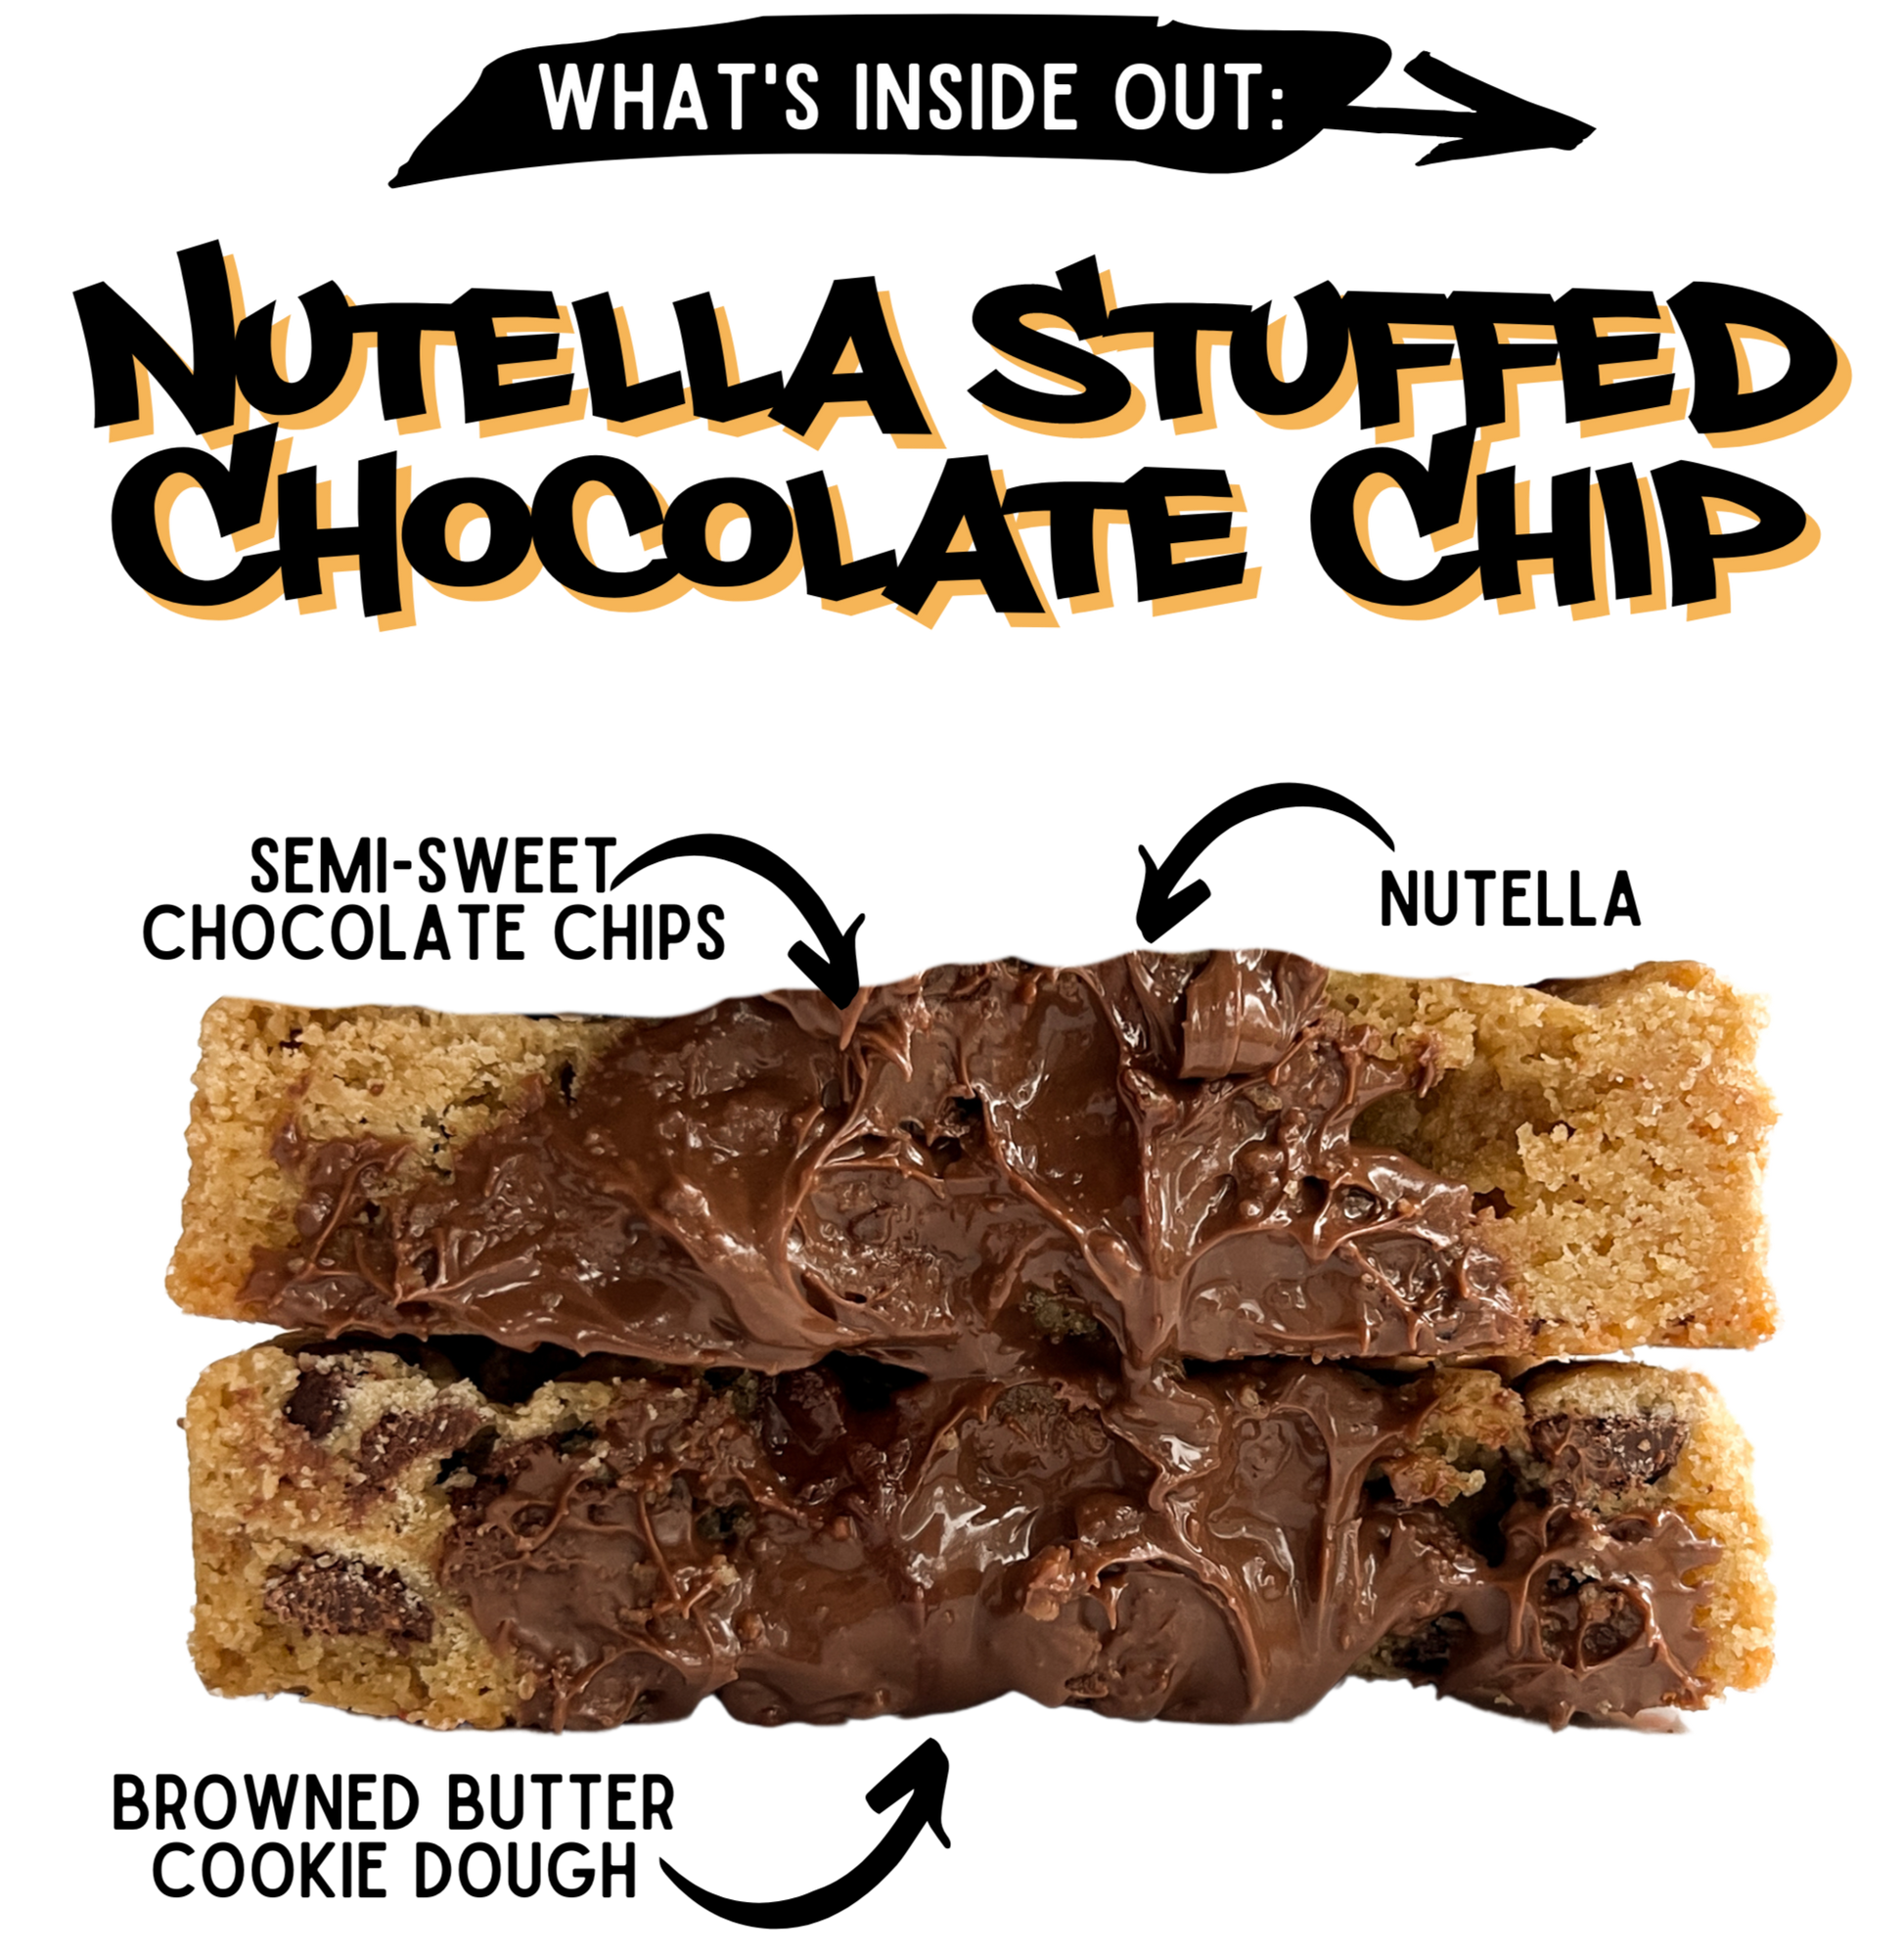 Inside Out Cookie nutella stuffed chocolate chip cookies